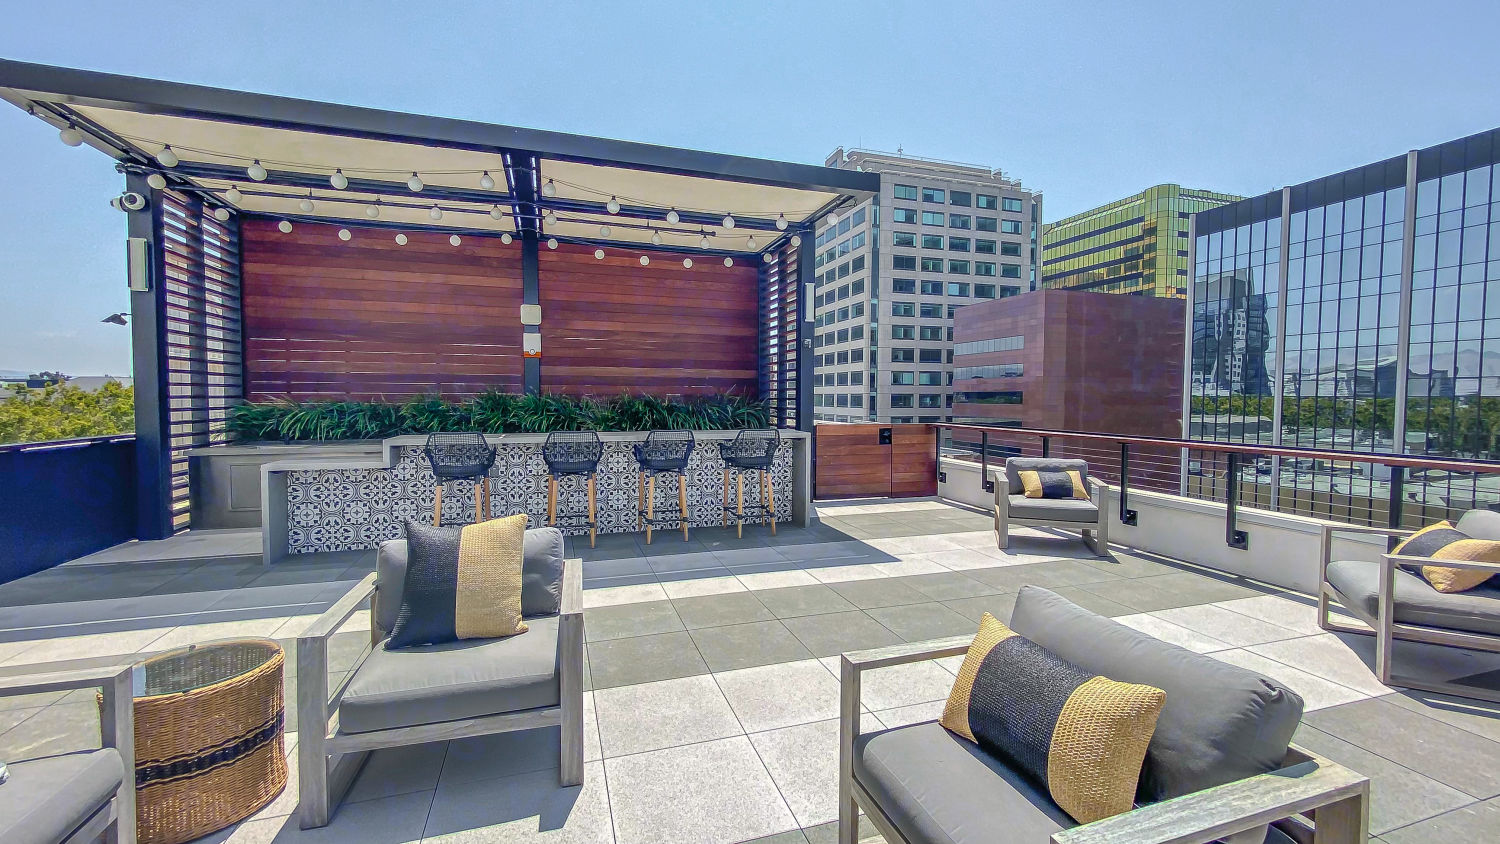 A rooftop patio consisting of a partially covered bar table and barstools surrounded by cushion lounge chairs on a clear sunny day